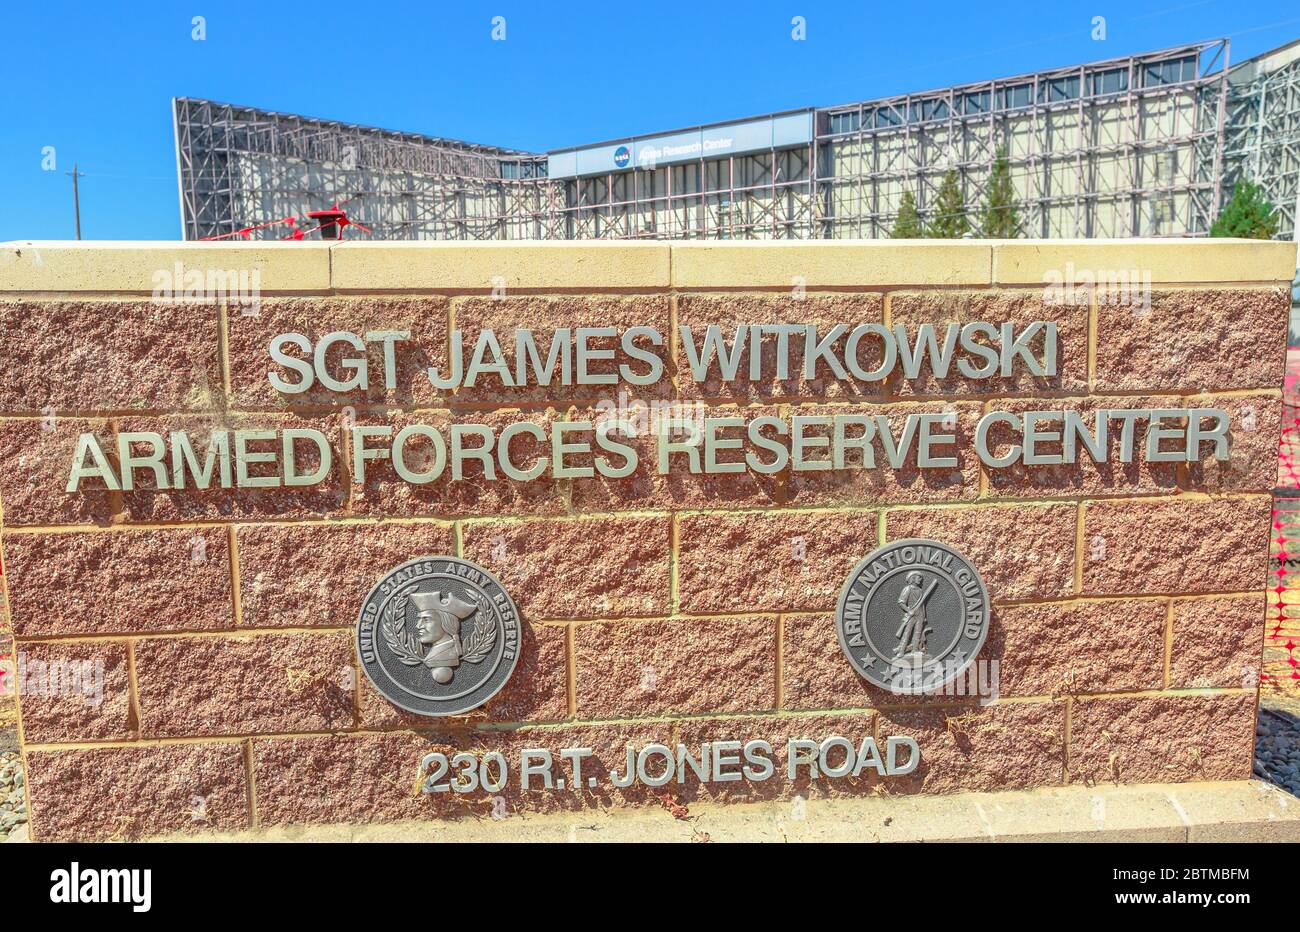 Mountain View, USA - 15. August 2016: James Witkowski Armed Forces Reserve Center, 230 jones Road, Moffett Federal Airfield. NASA Stockfoto